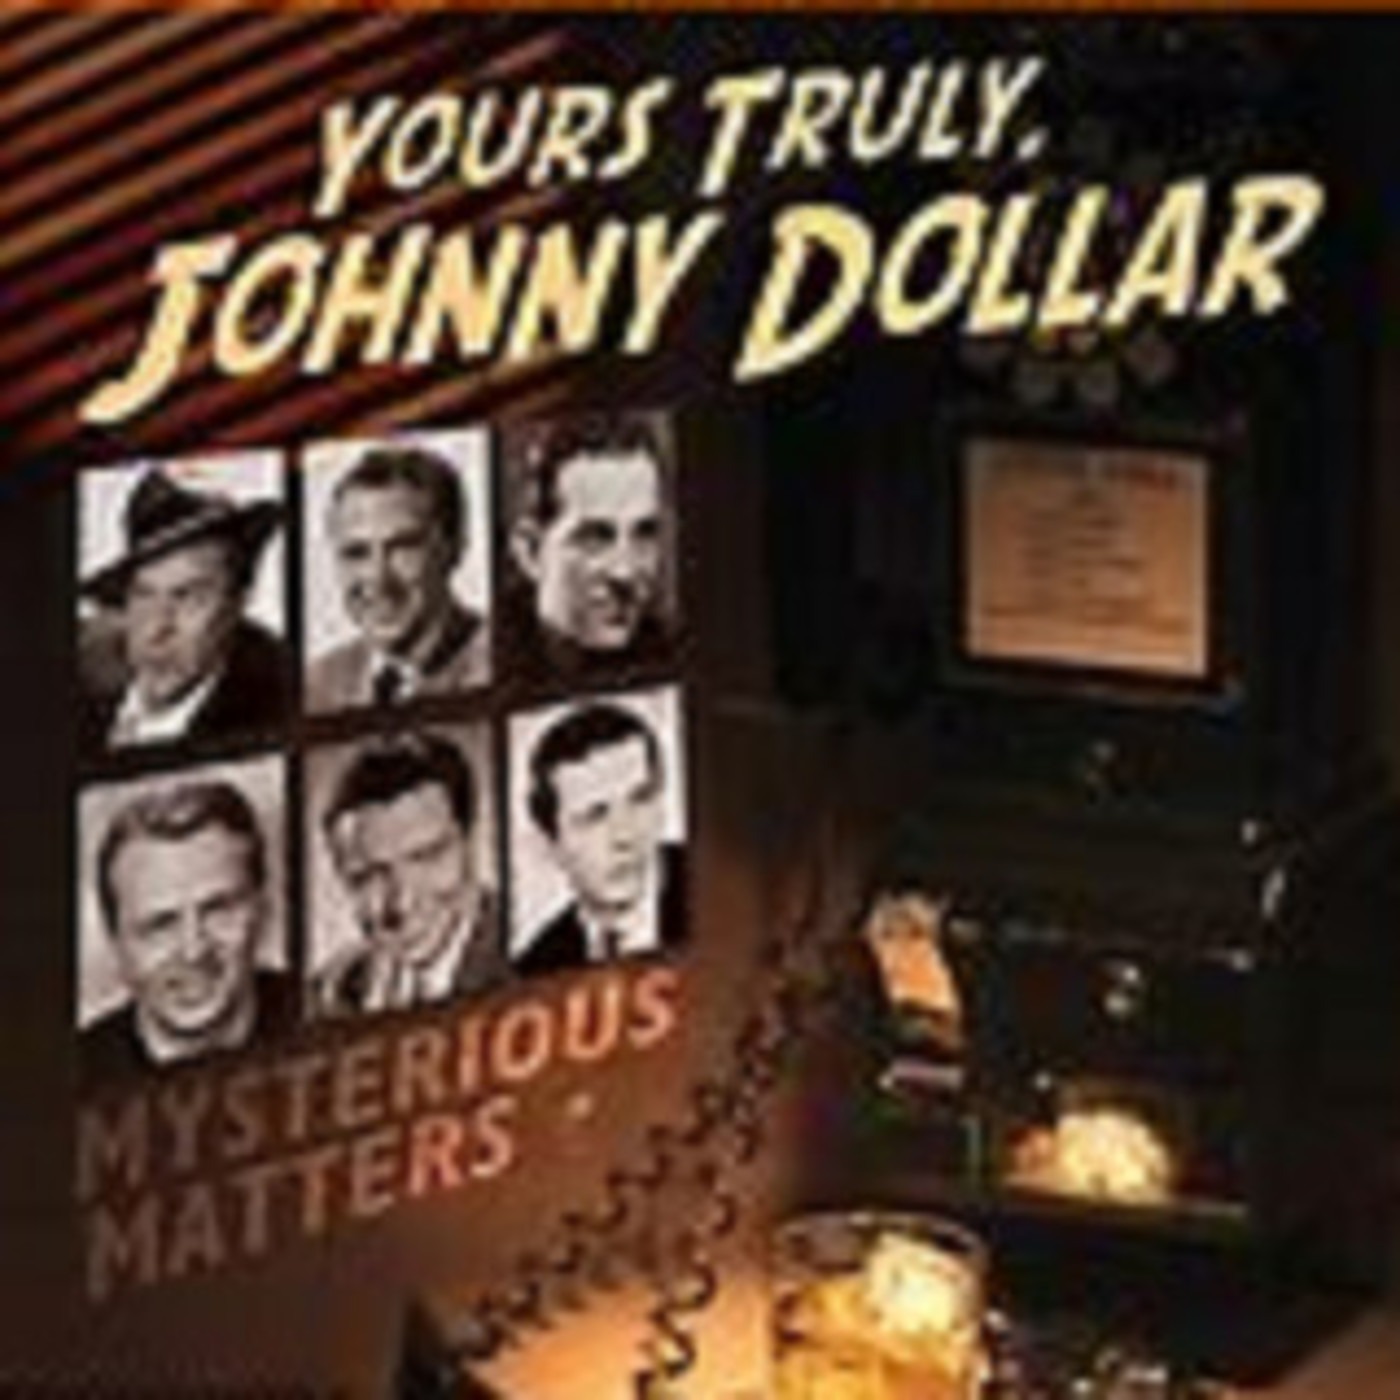 Yours Truly, Johnny Dollar - 091662, episode 809 - The No Matter Matter